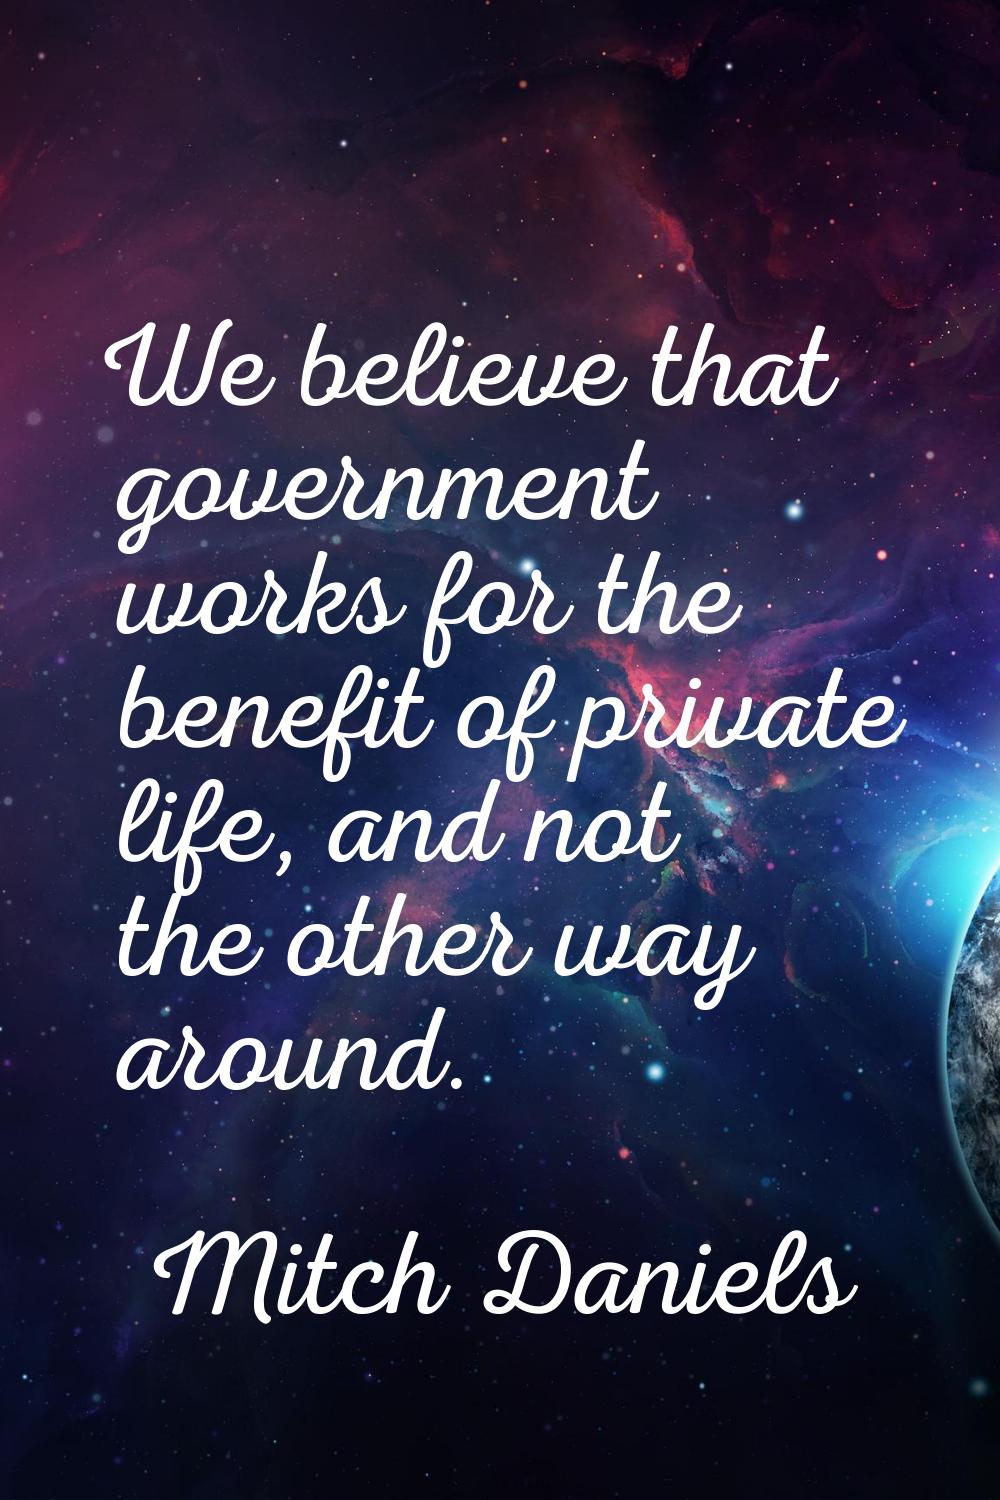 We believe that government works for the benefit of private life, and not the other way around.